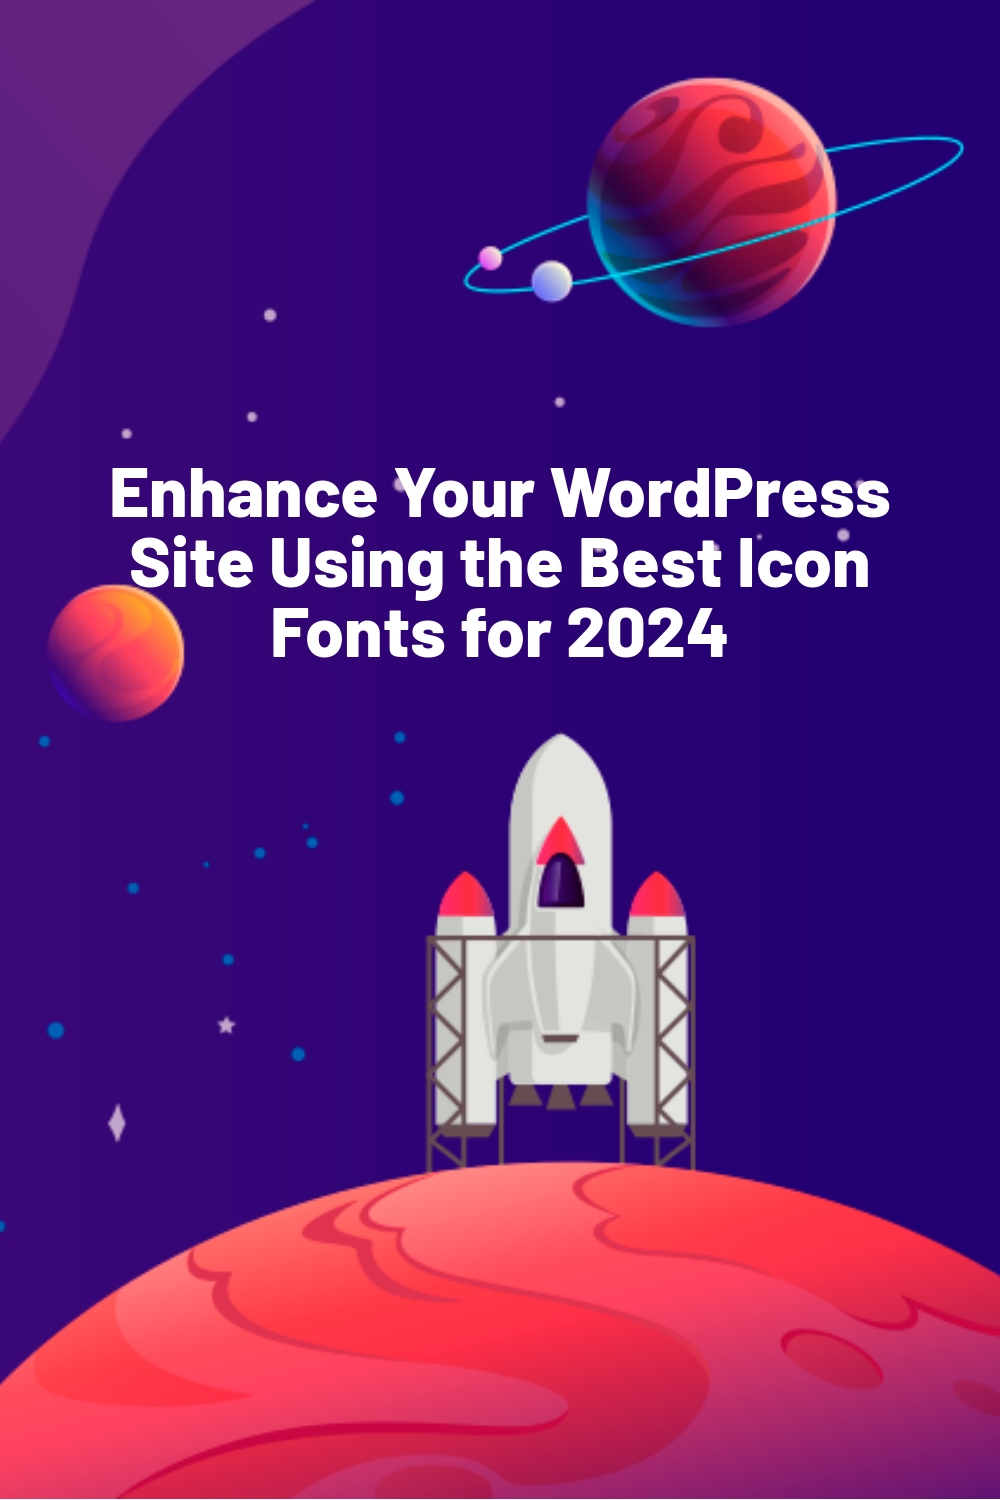 Enhance Your WordPress Site Using the Best Icon Fonts for 2024